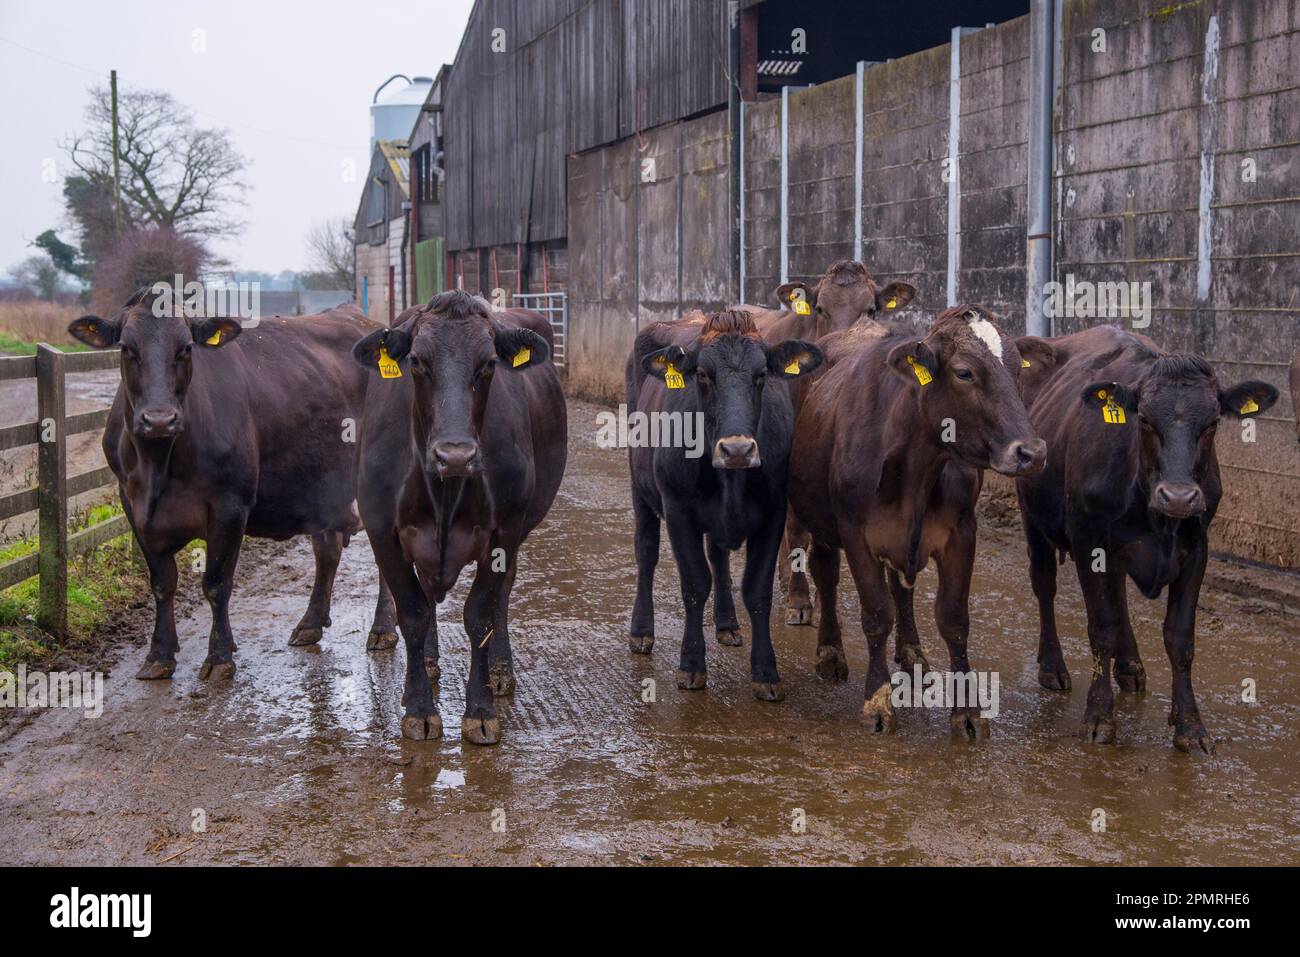 Domestic cattle, Brown Swiss and Brown Swiss cross dairy cows, herd standing on farm, Nantwich, Cheshire, England, United Kingdom Stock Photo